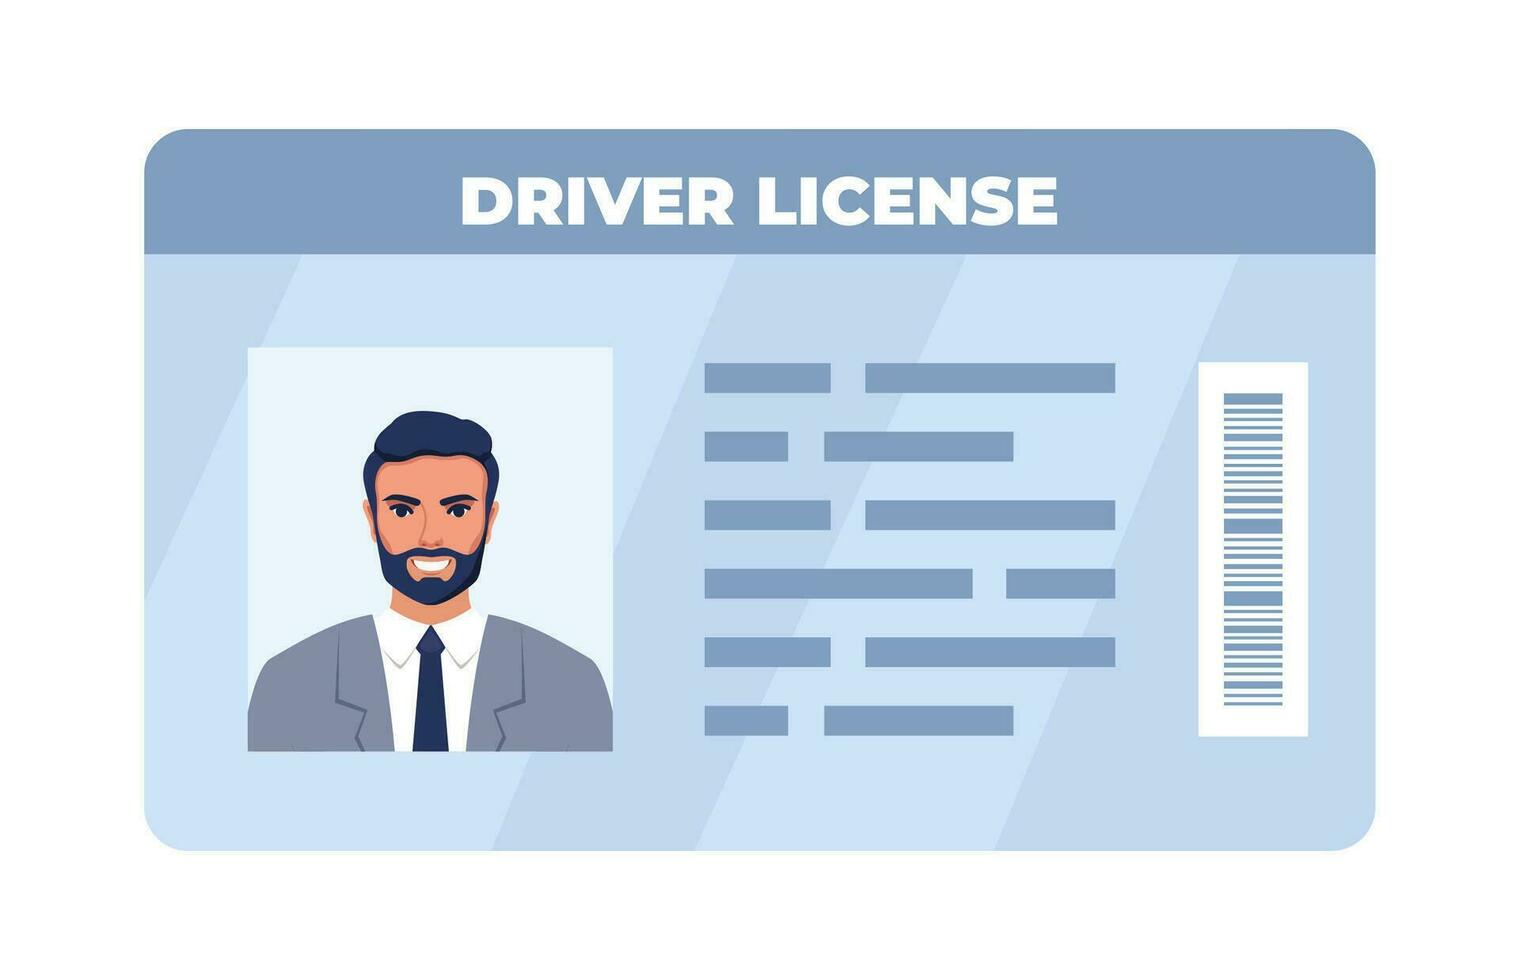 Driver License ID card. Personal info data. Identification document with person photo. User or profile card. Driver's license. Flat style. Vector illustration.